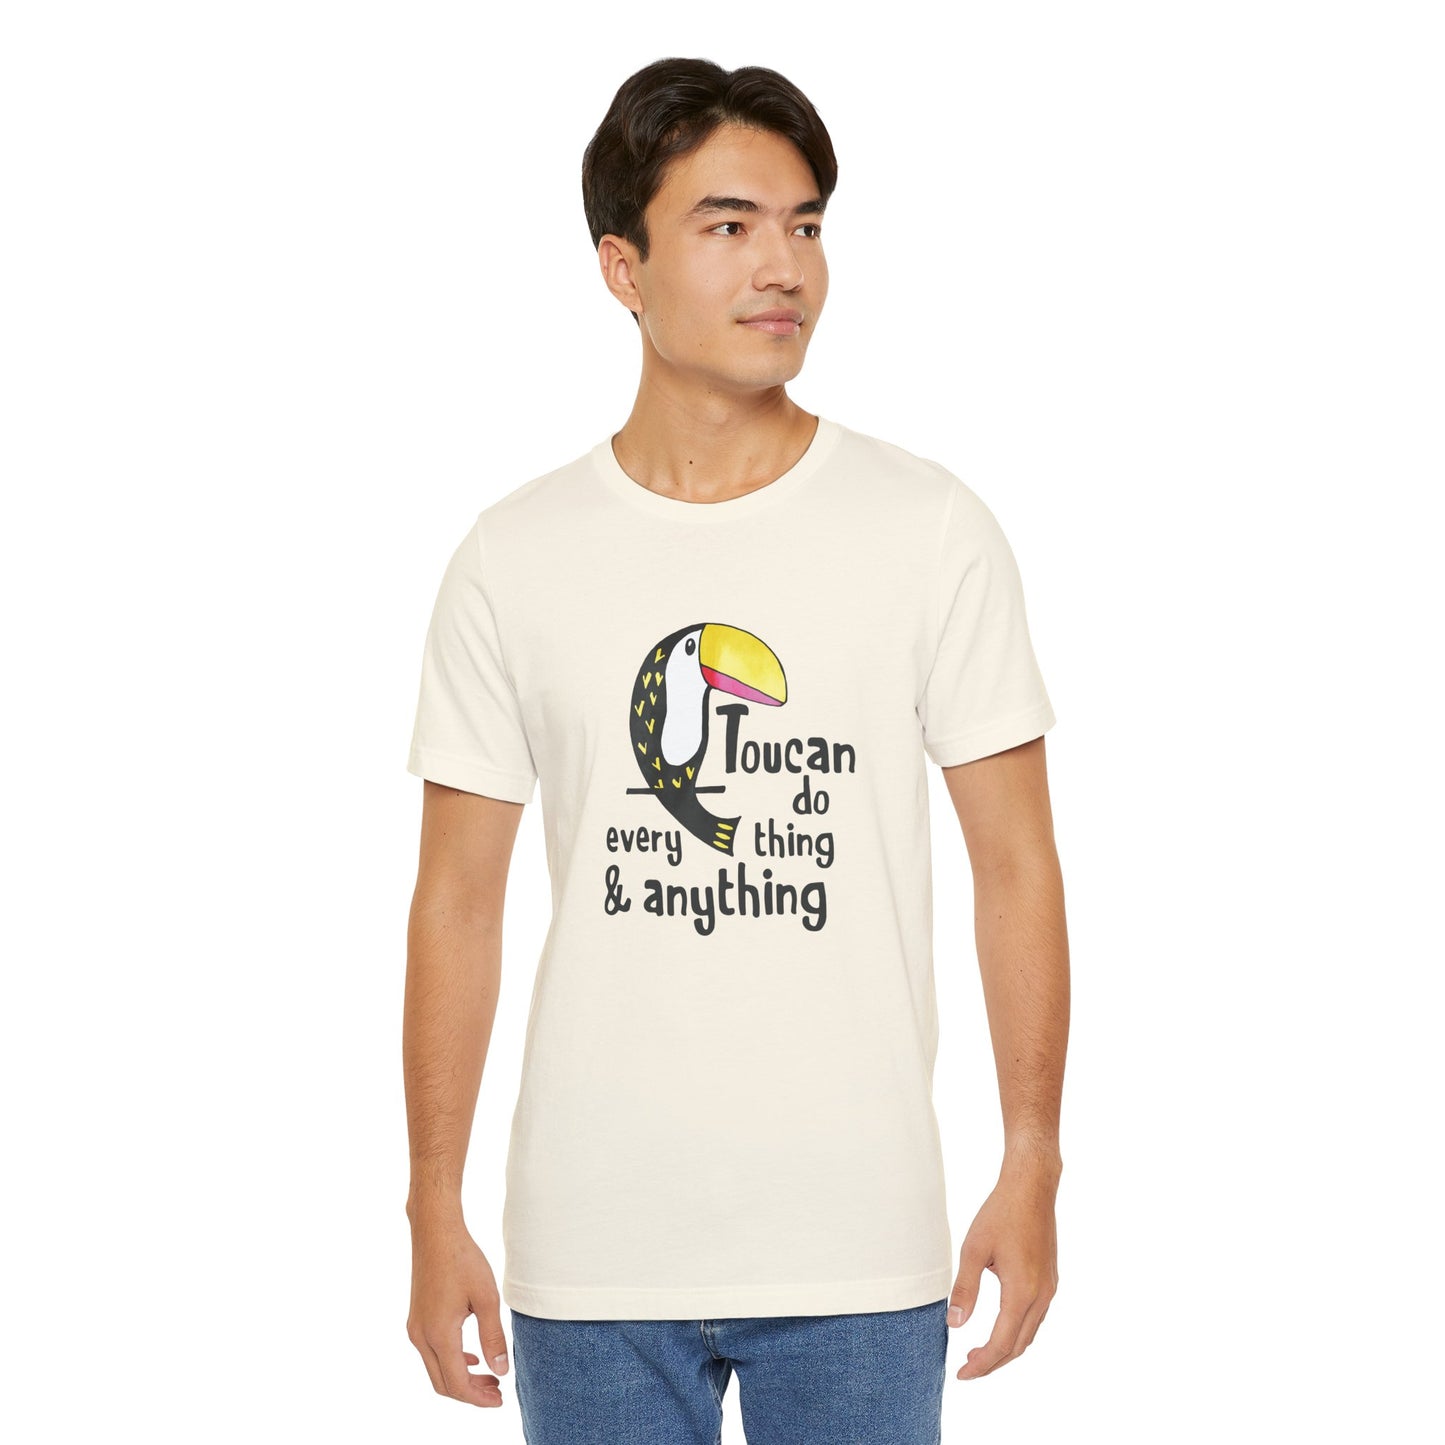 Toucan Do Everything and Anything Inspirational Quote Short Sleeve T-Shirt - Unisex - Motivational Treats